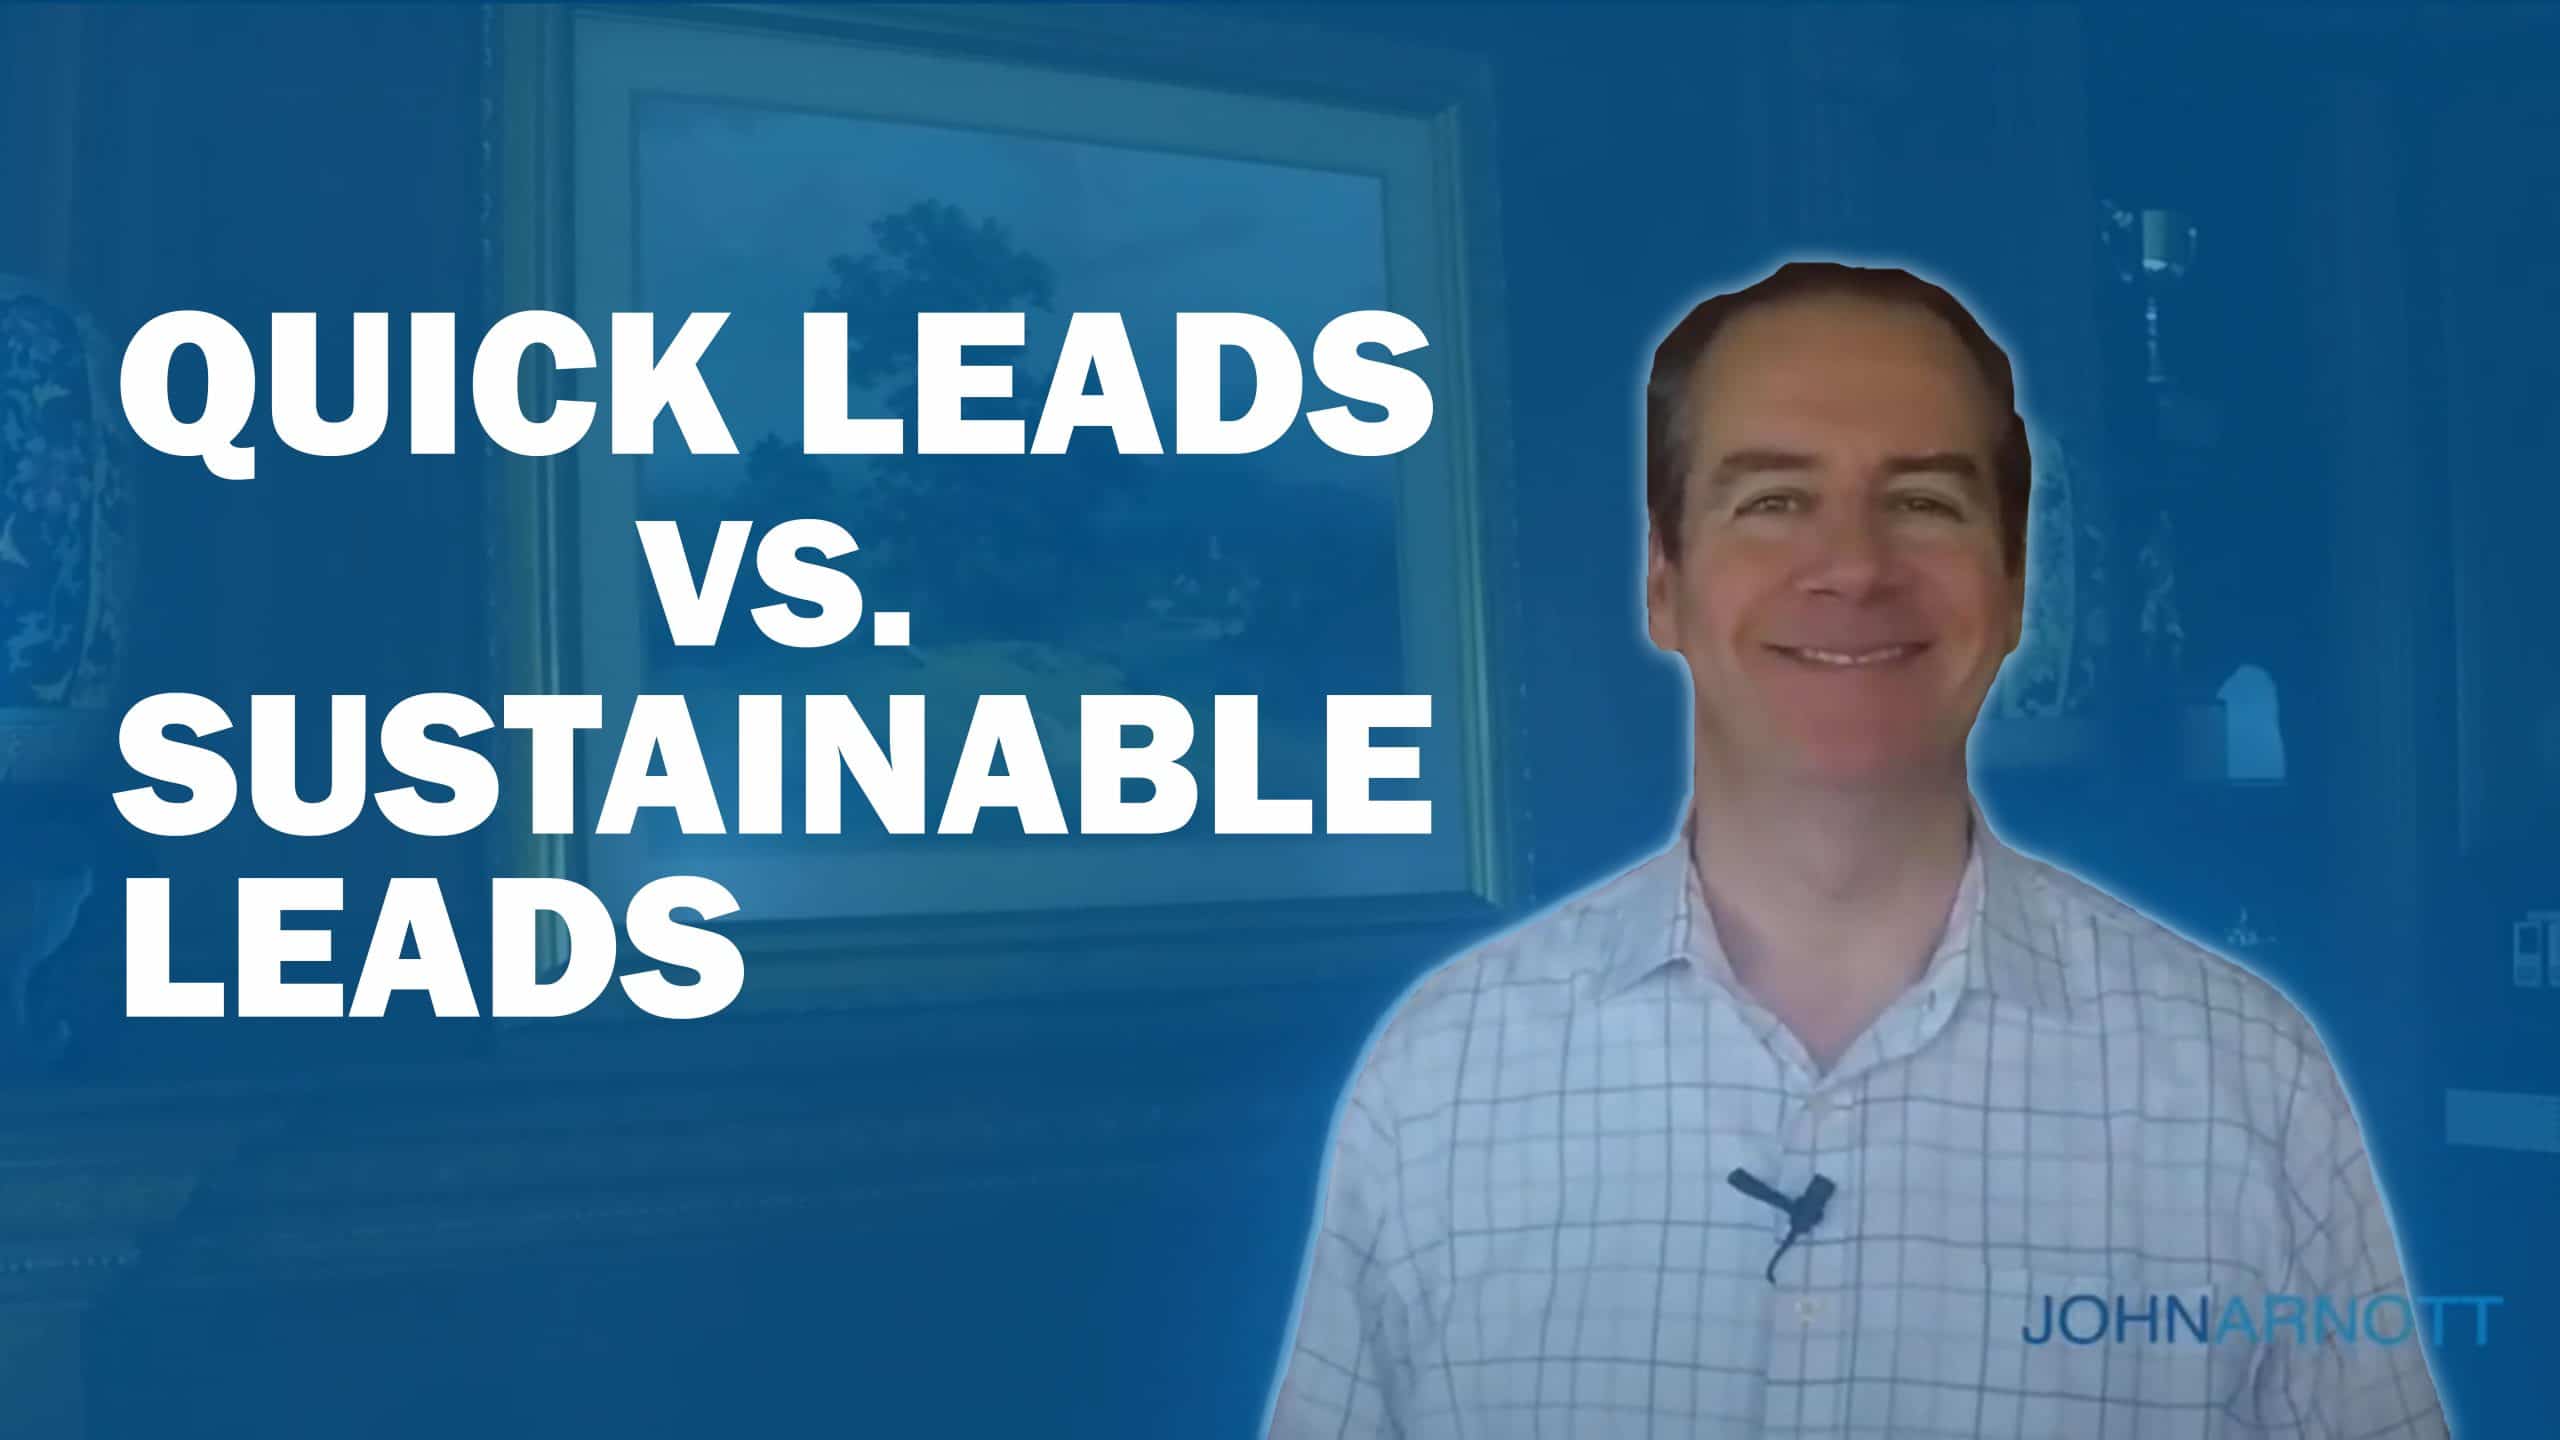 Quick Leads vs Sustainable Leads